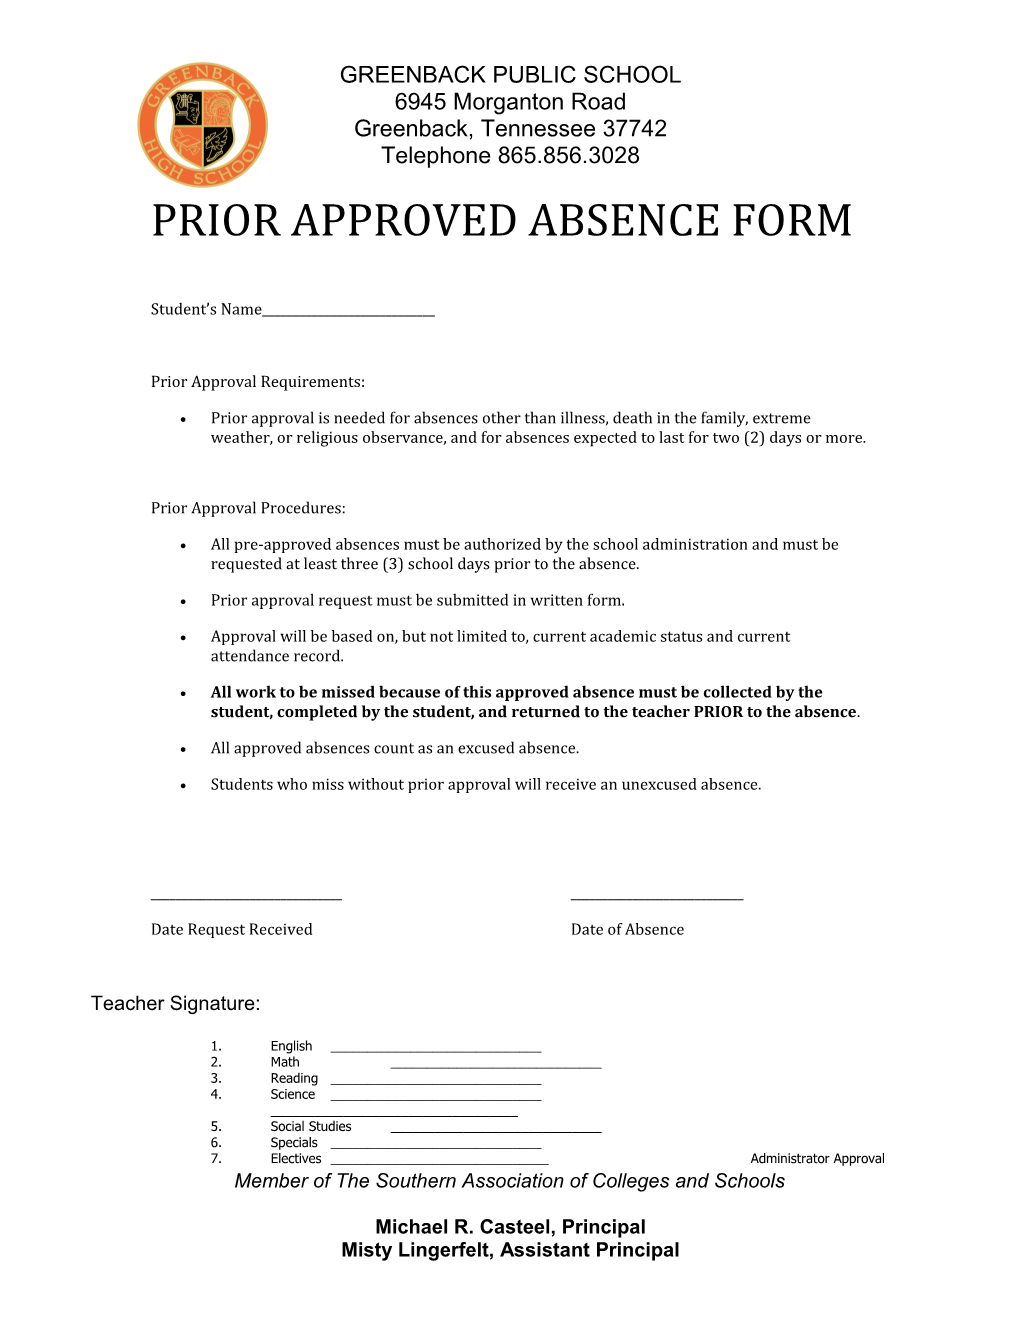 Prior Approved Absence Form